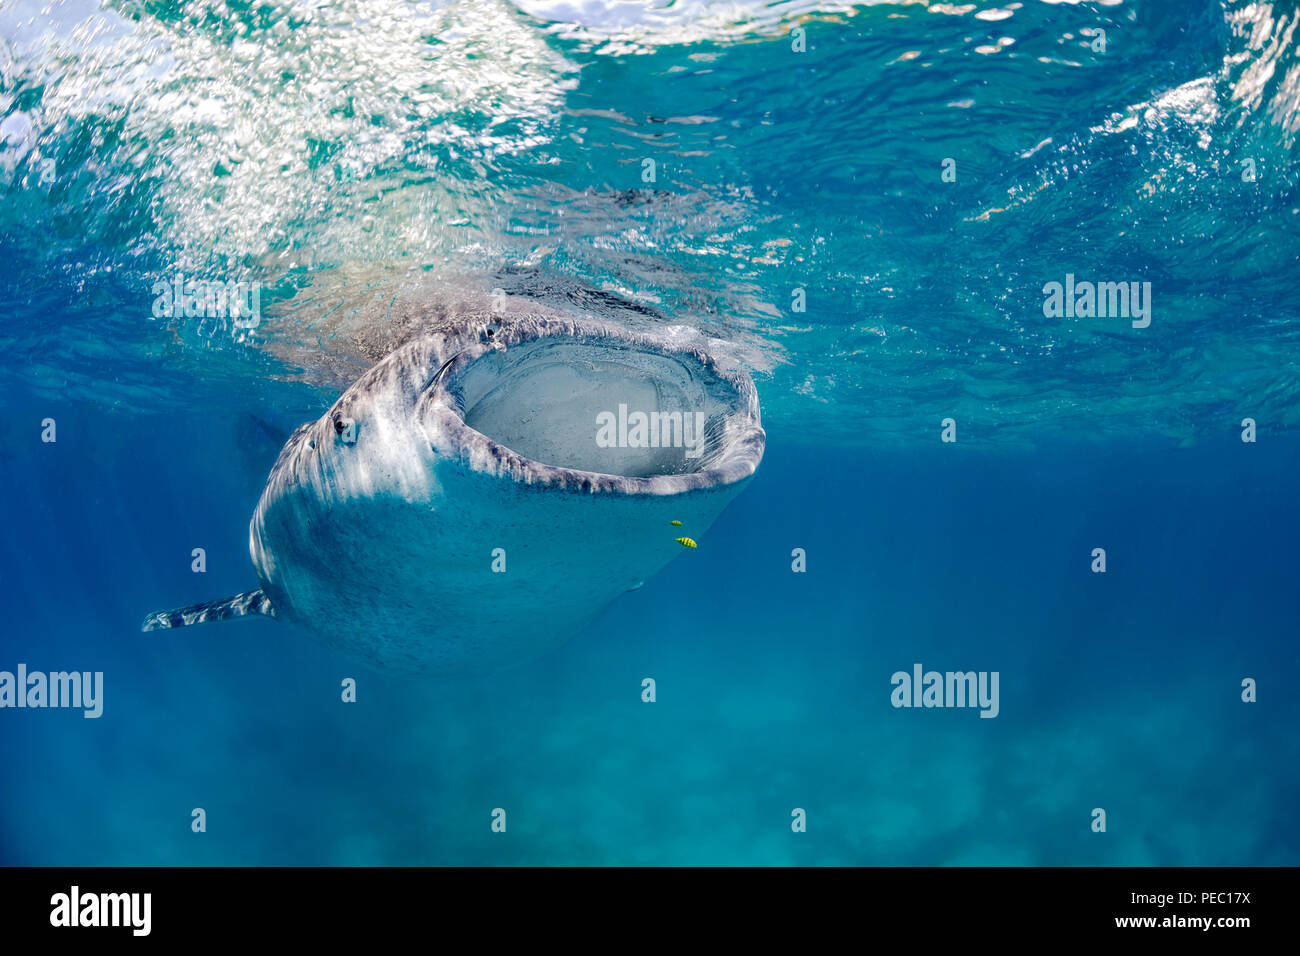 A whale shark, Rhiniodon typus, with its mouth open, filter feeding at the surface, Philippines. This is the worlds largest species of fish. Stock Photo